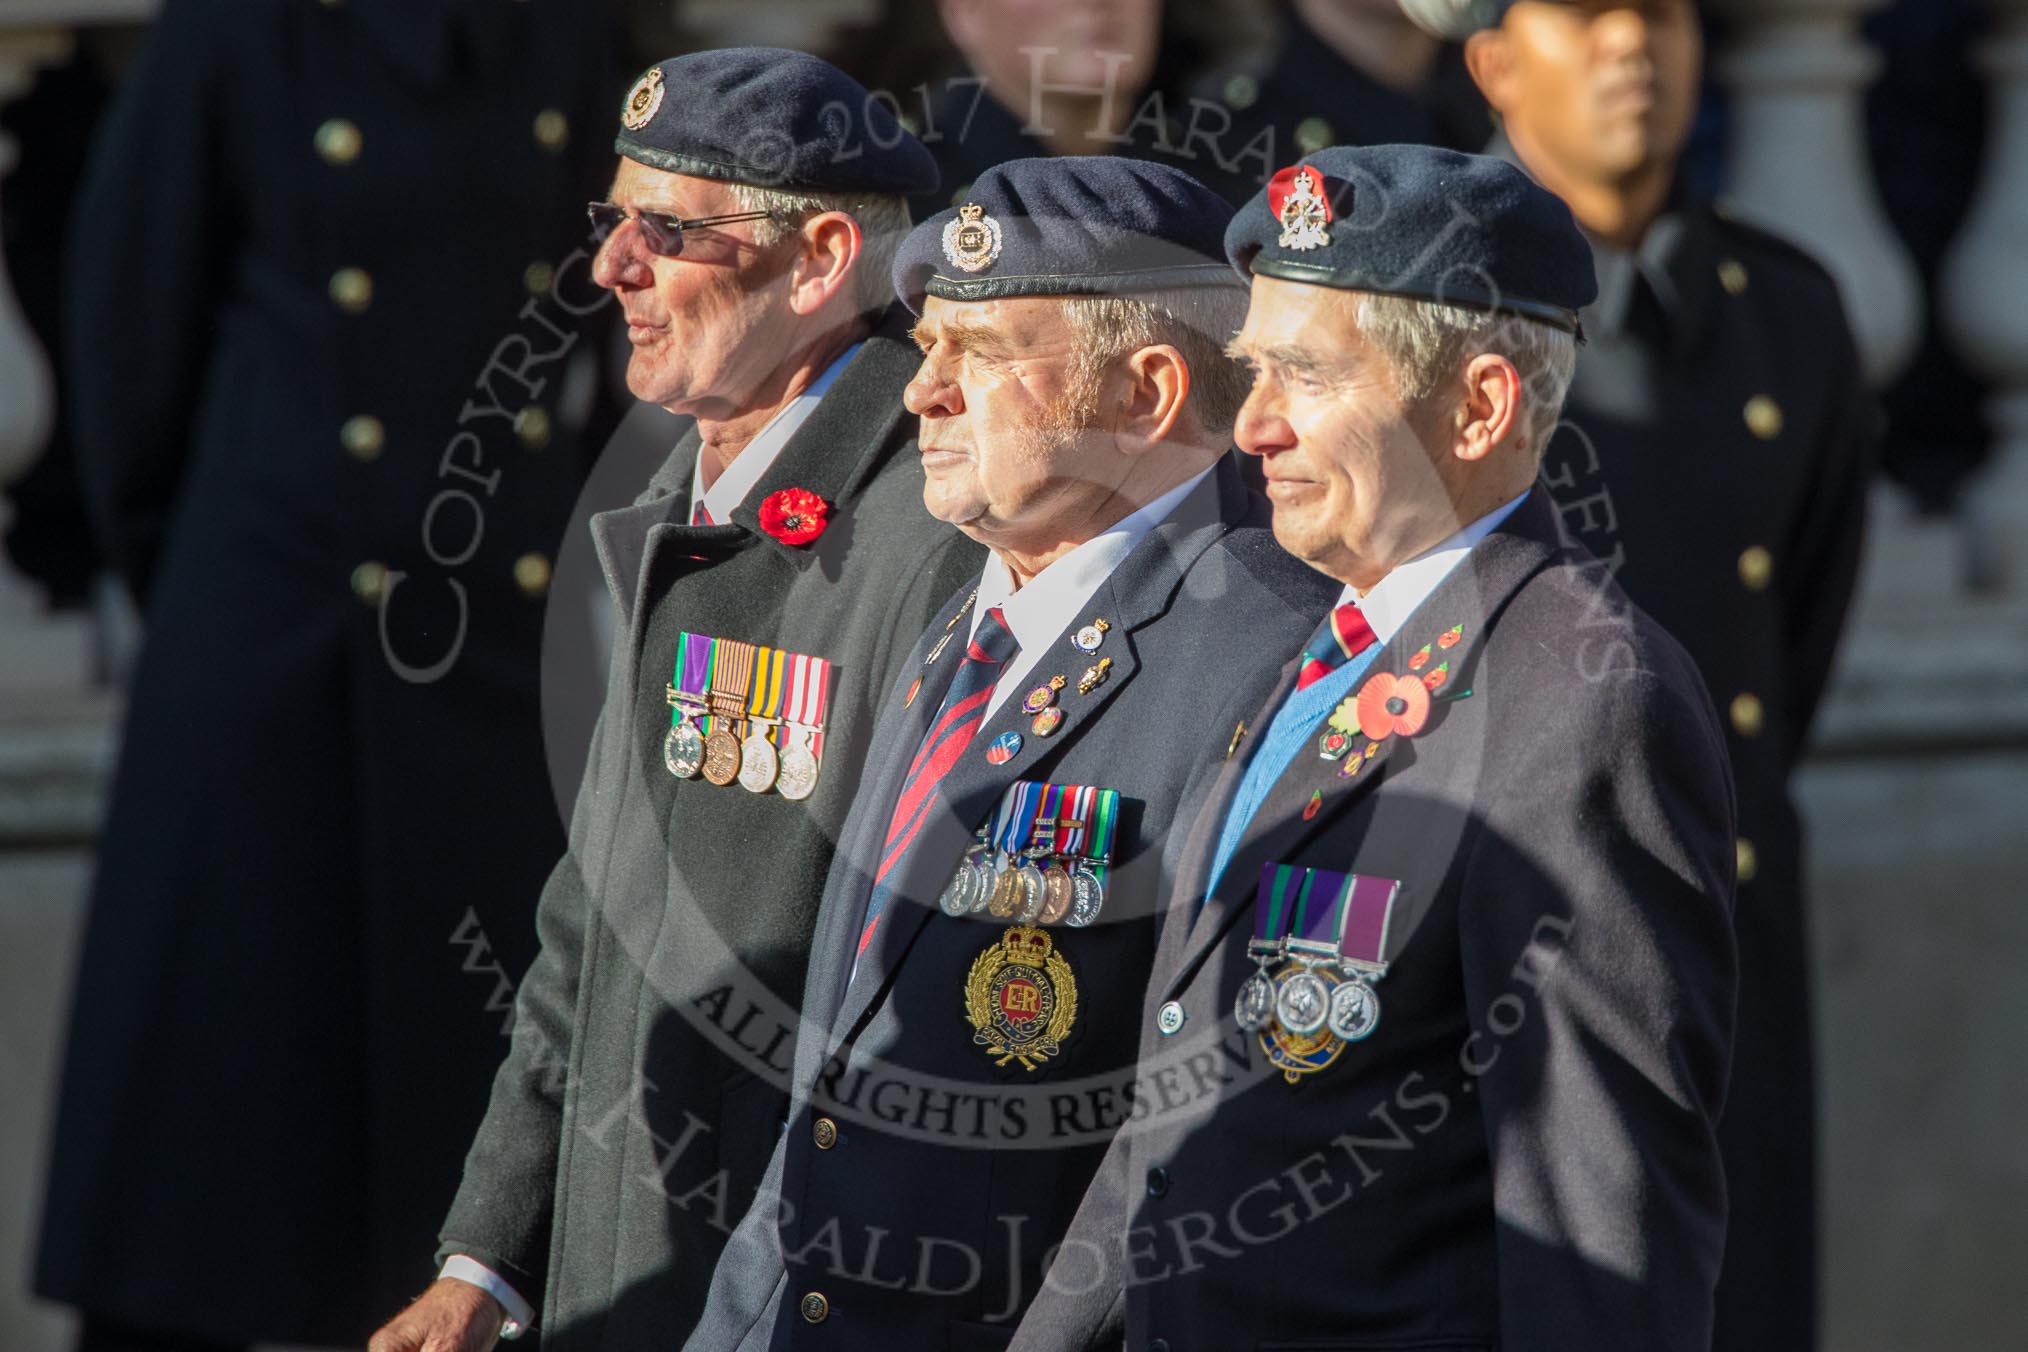 Beachley Old Boys' Association (BOBA) (Group B25, 29 members) during the Royal British Legion March Past on Remembrance Sunday at the Cenotaph, Whitehall, Westminster, London, 11 November 2018, 12:11.